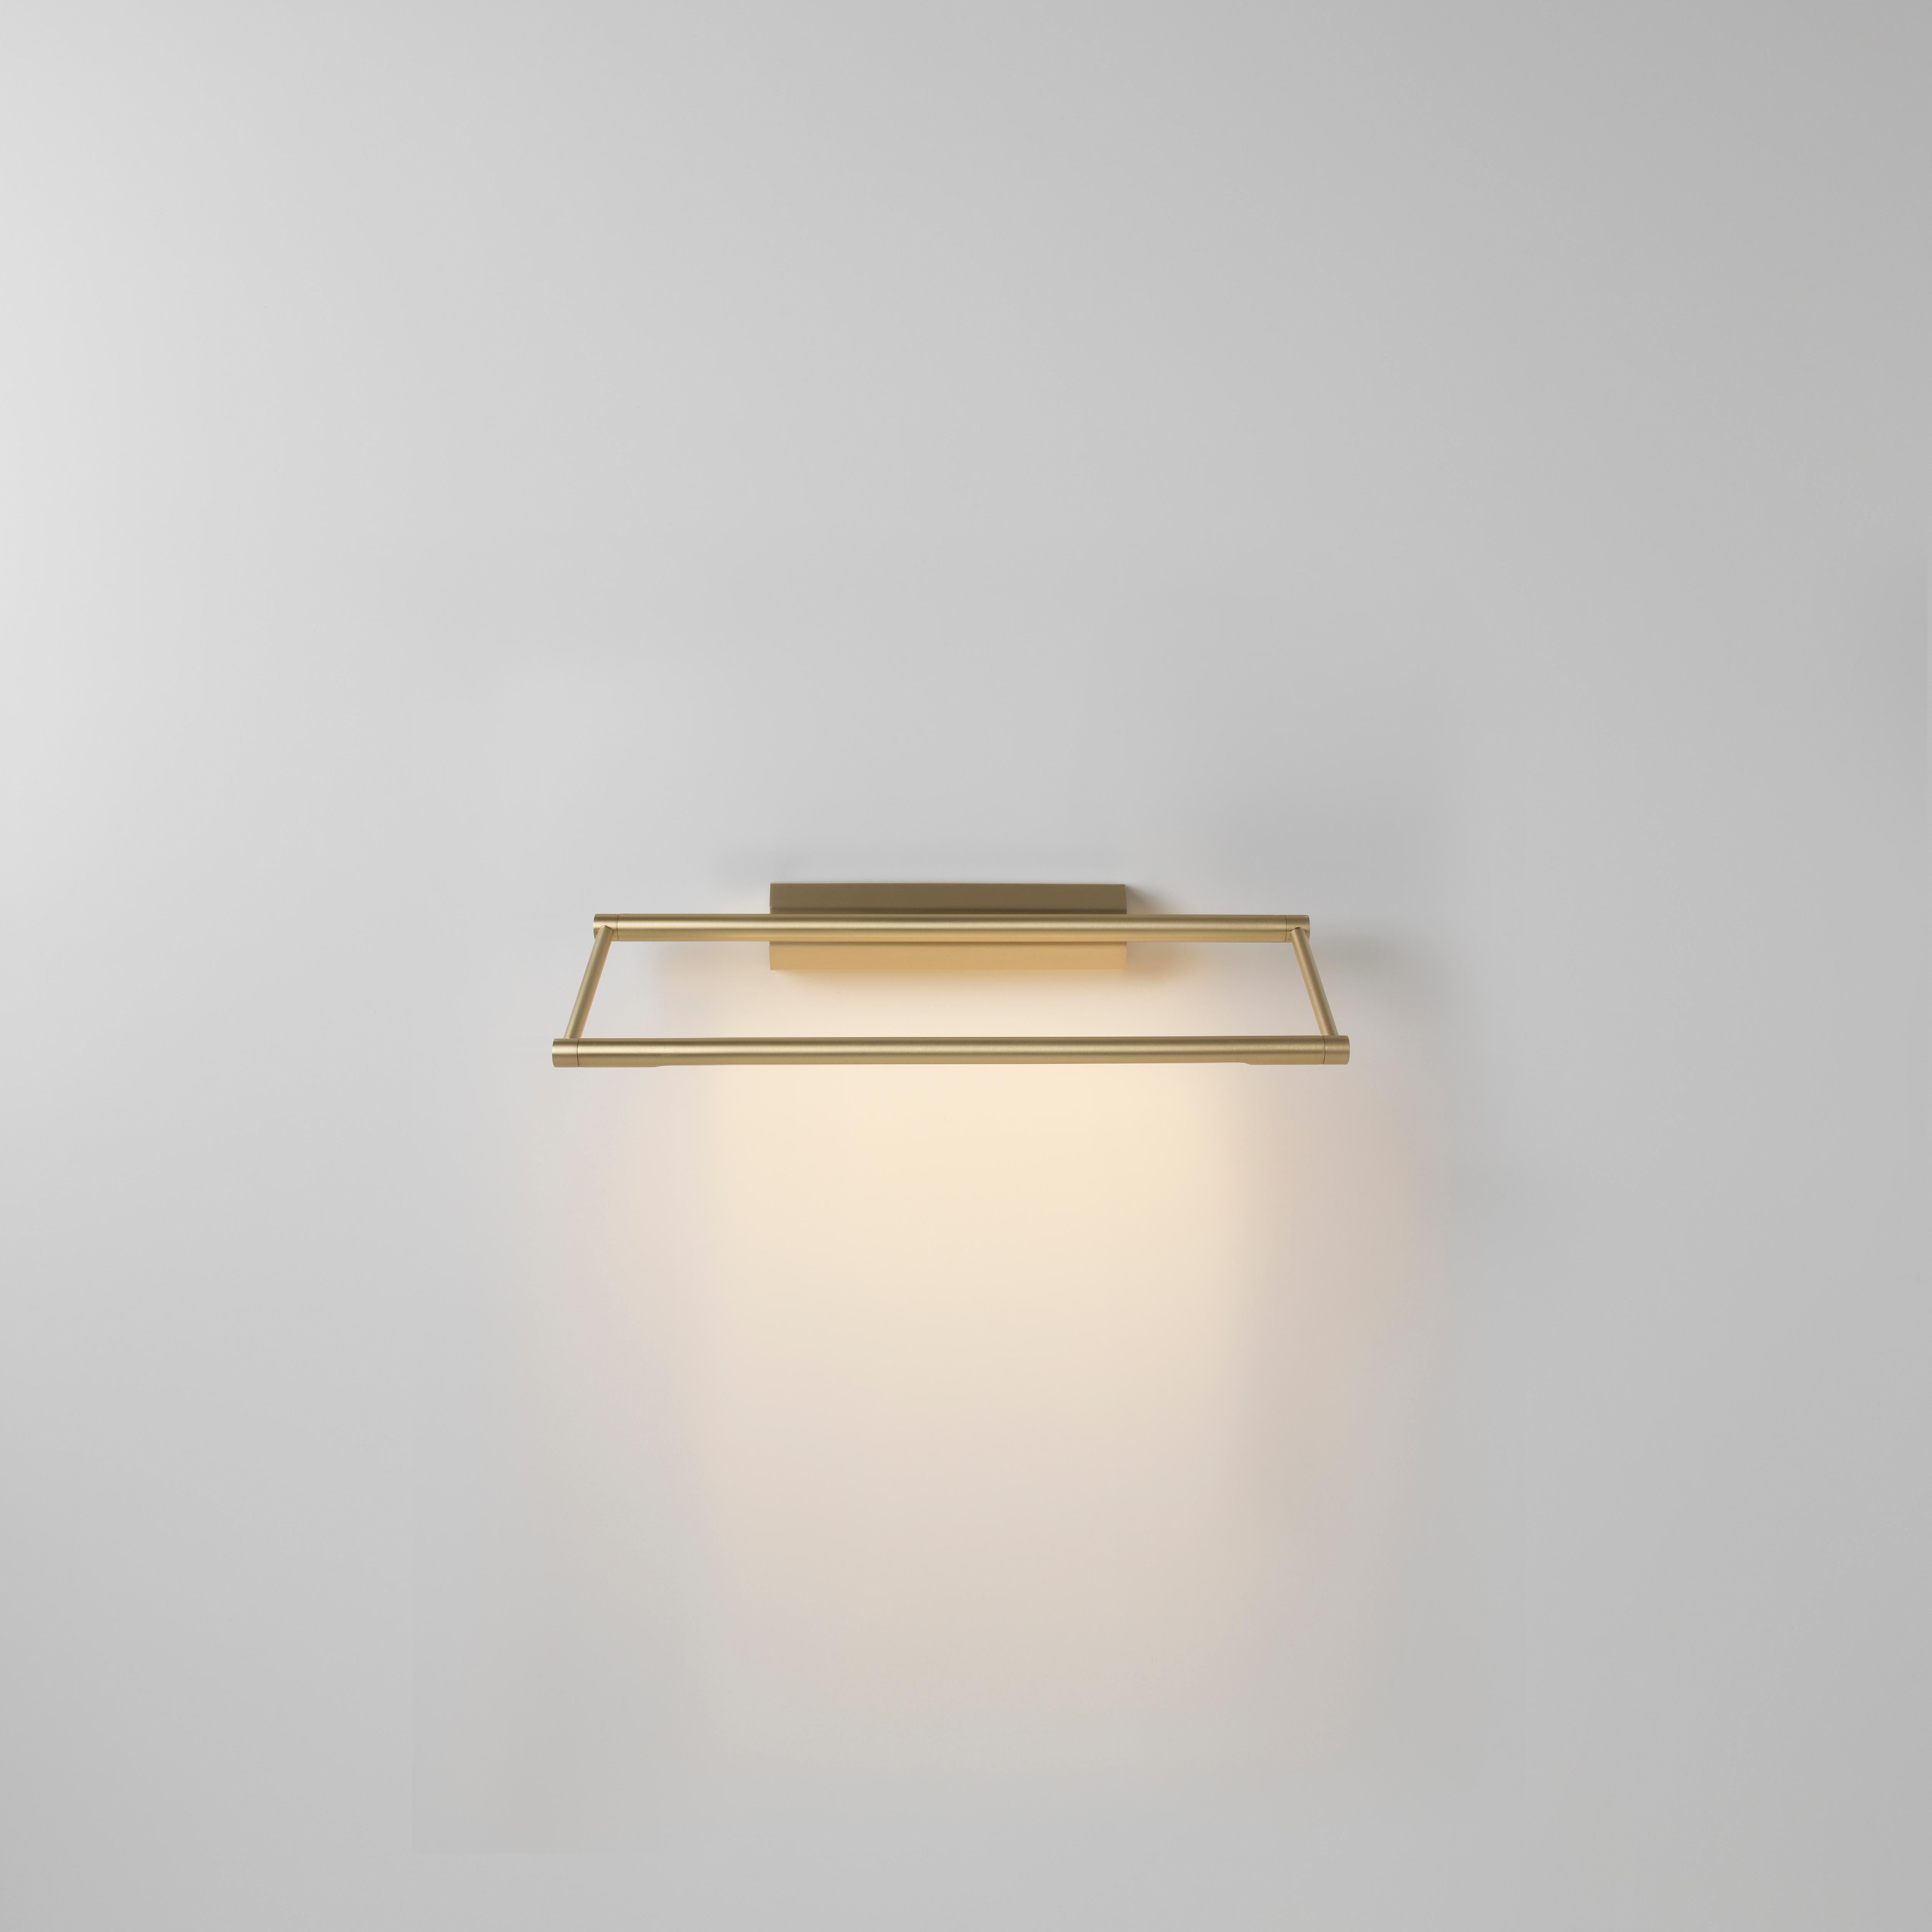 Link 325 brass wall light by Emilie Cathelineau
Dimensions: D 32.5 x W 11.5 x H 4.4 cm
Materials: Solid brass, Satin Polycarbonate diffuser, Black textile cable (2m)
Others finishes and dimensions are available.

All our lamps can be wired